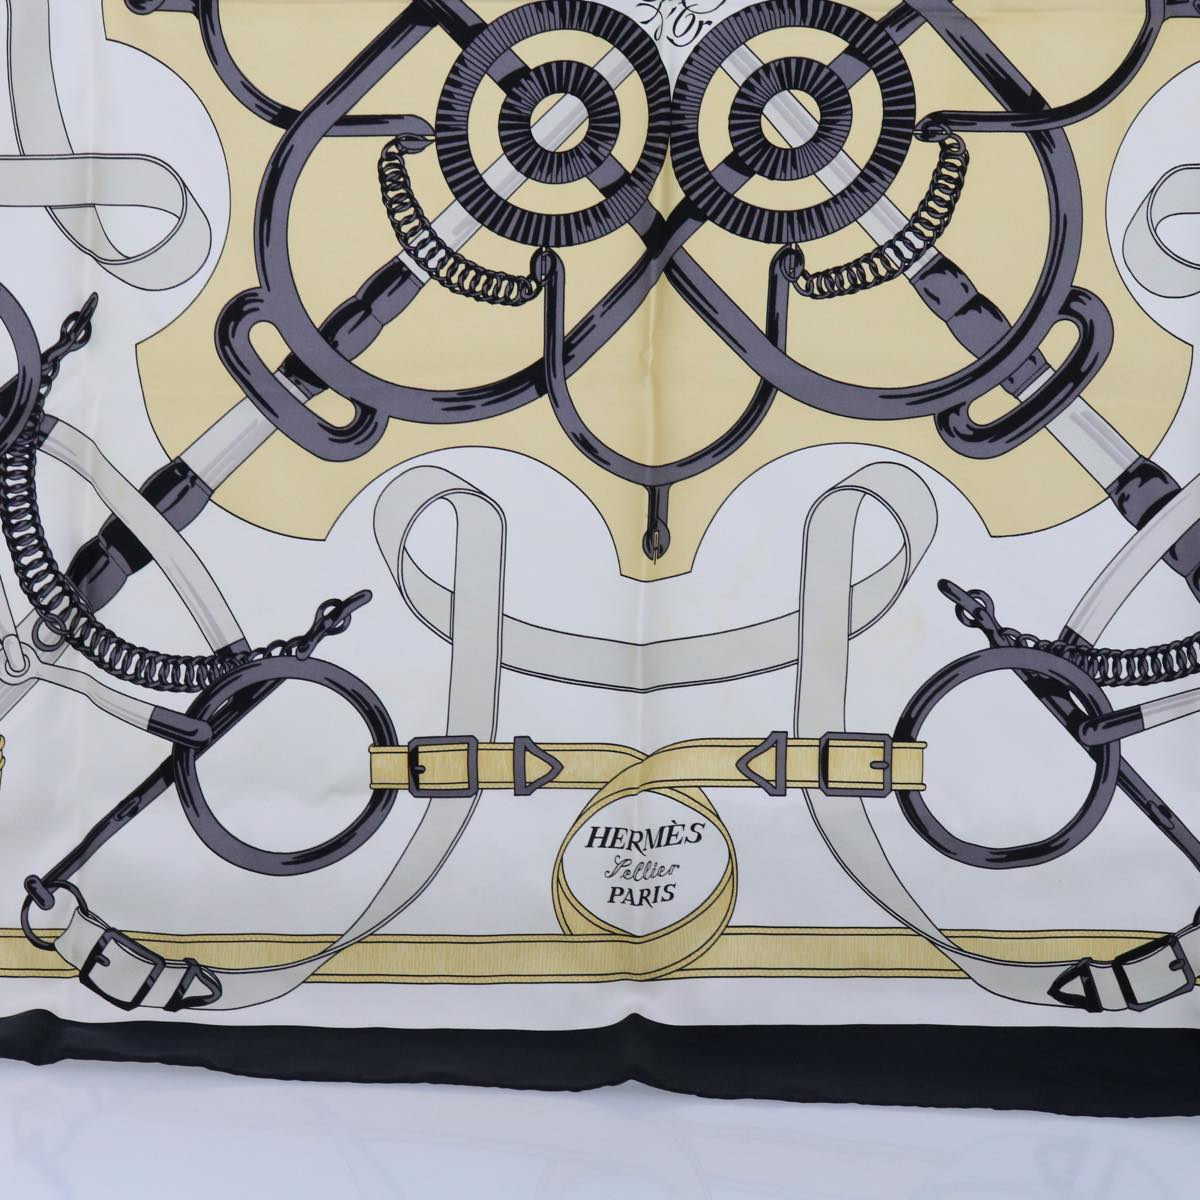 HERMES Carre 90 Eperon d’Or Scarf Silk Black White Auth am5304